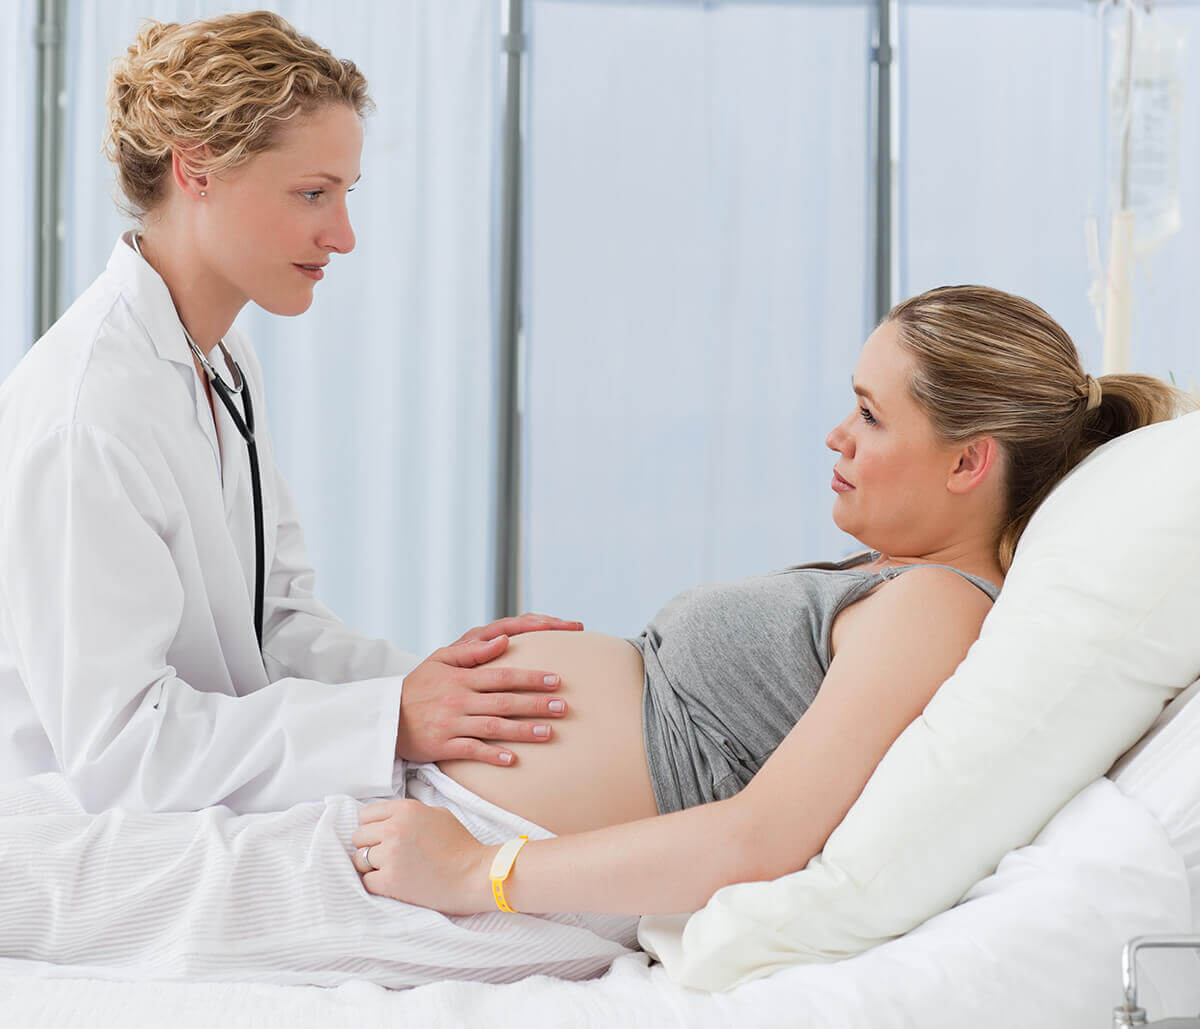 Obstetrics Procedures at Jenkins Obstetrics, Gynecology and Reproductive Medicine in Katy TX Area